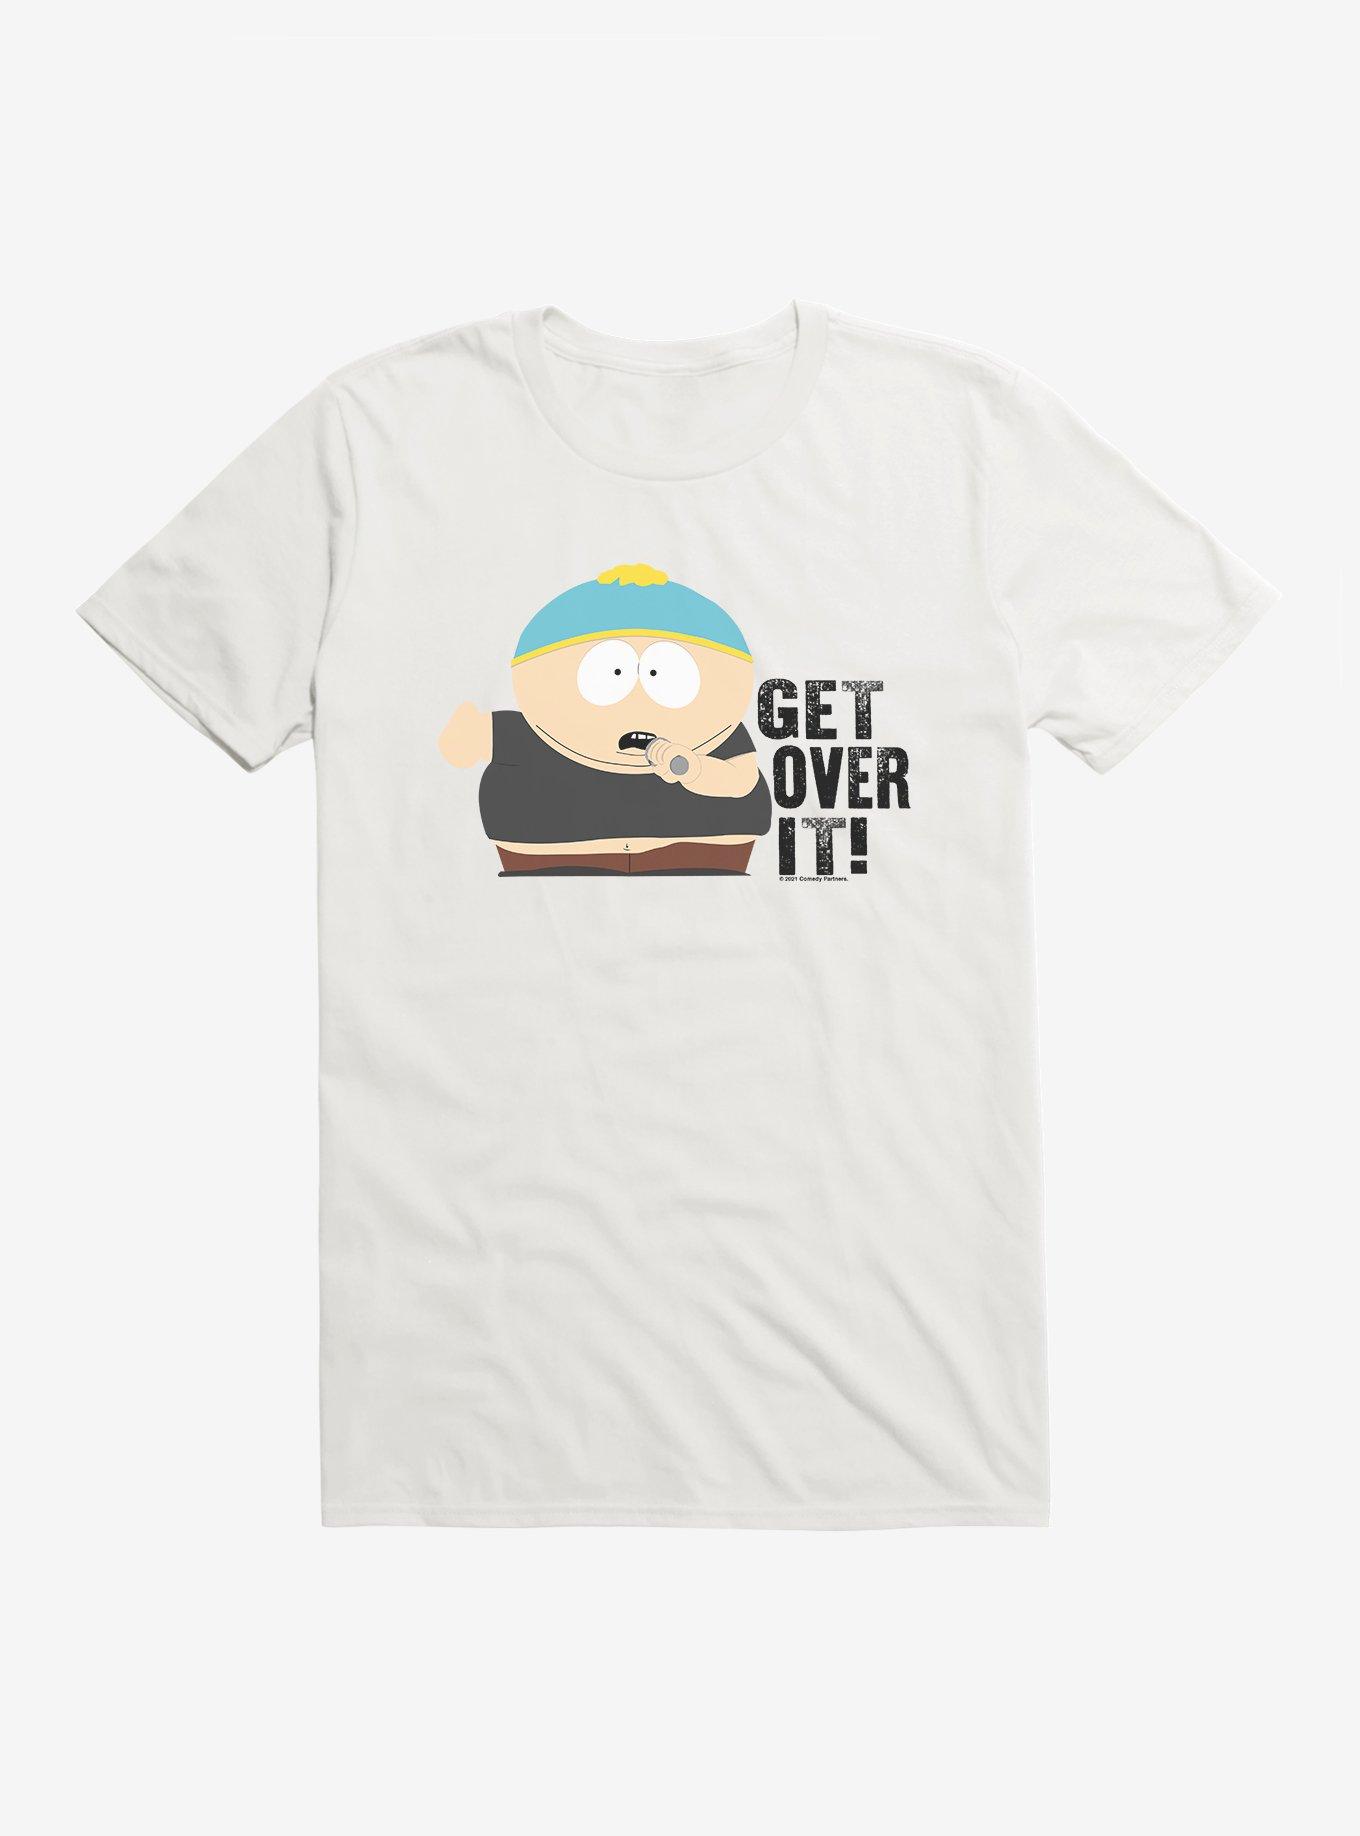 South Park Season Reference Cartman Over It T-Shirt, WHITE, hi-res